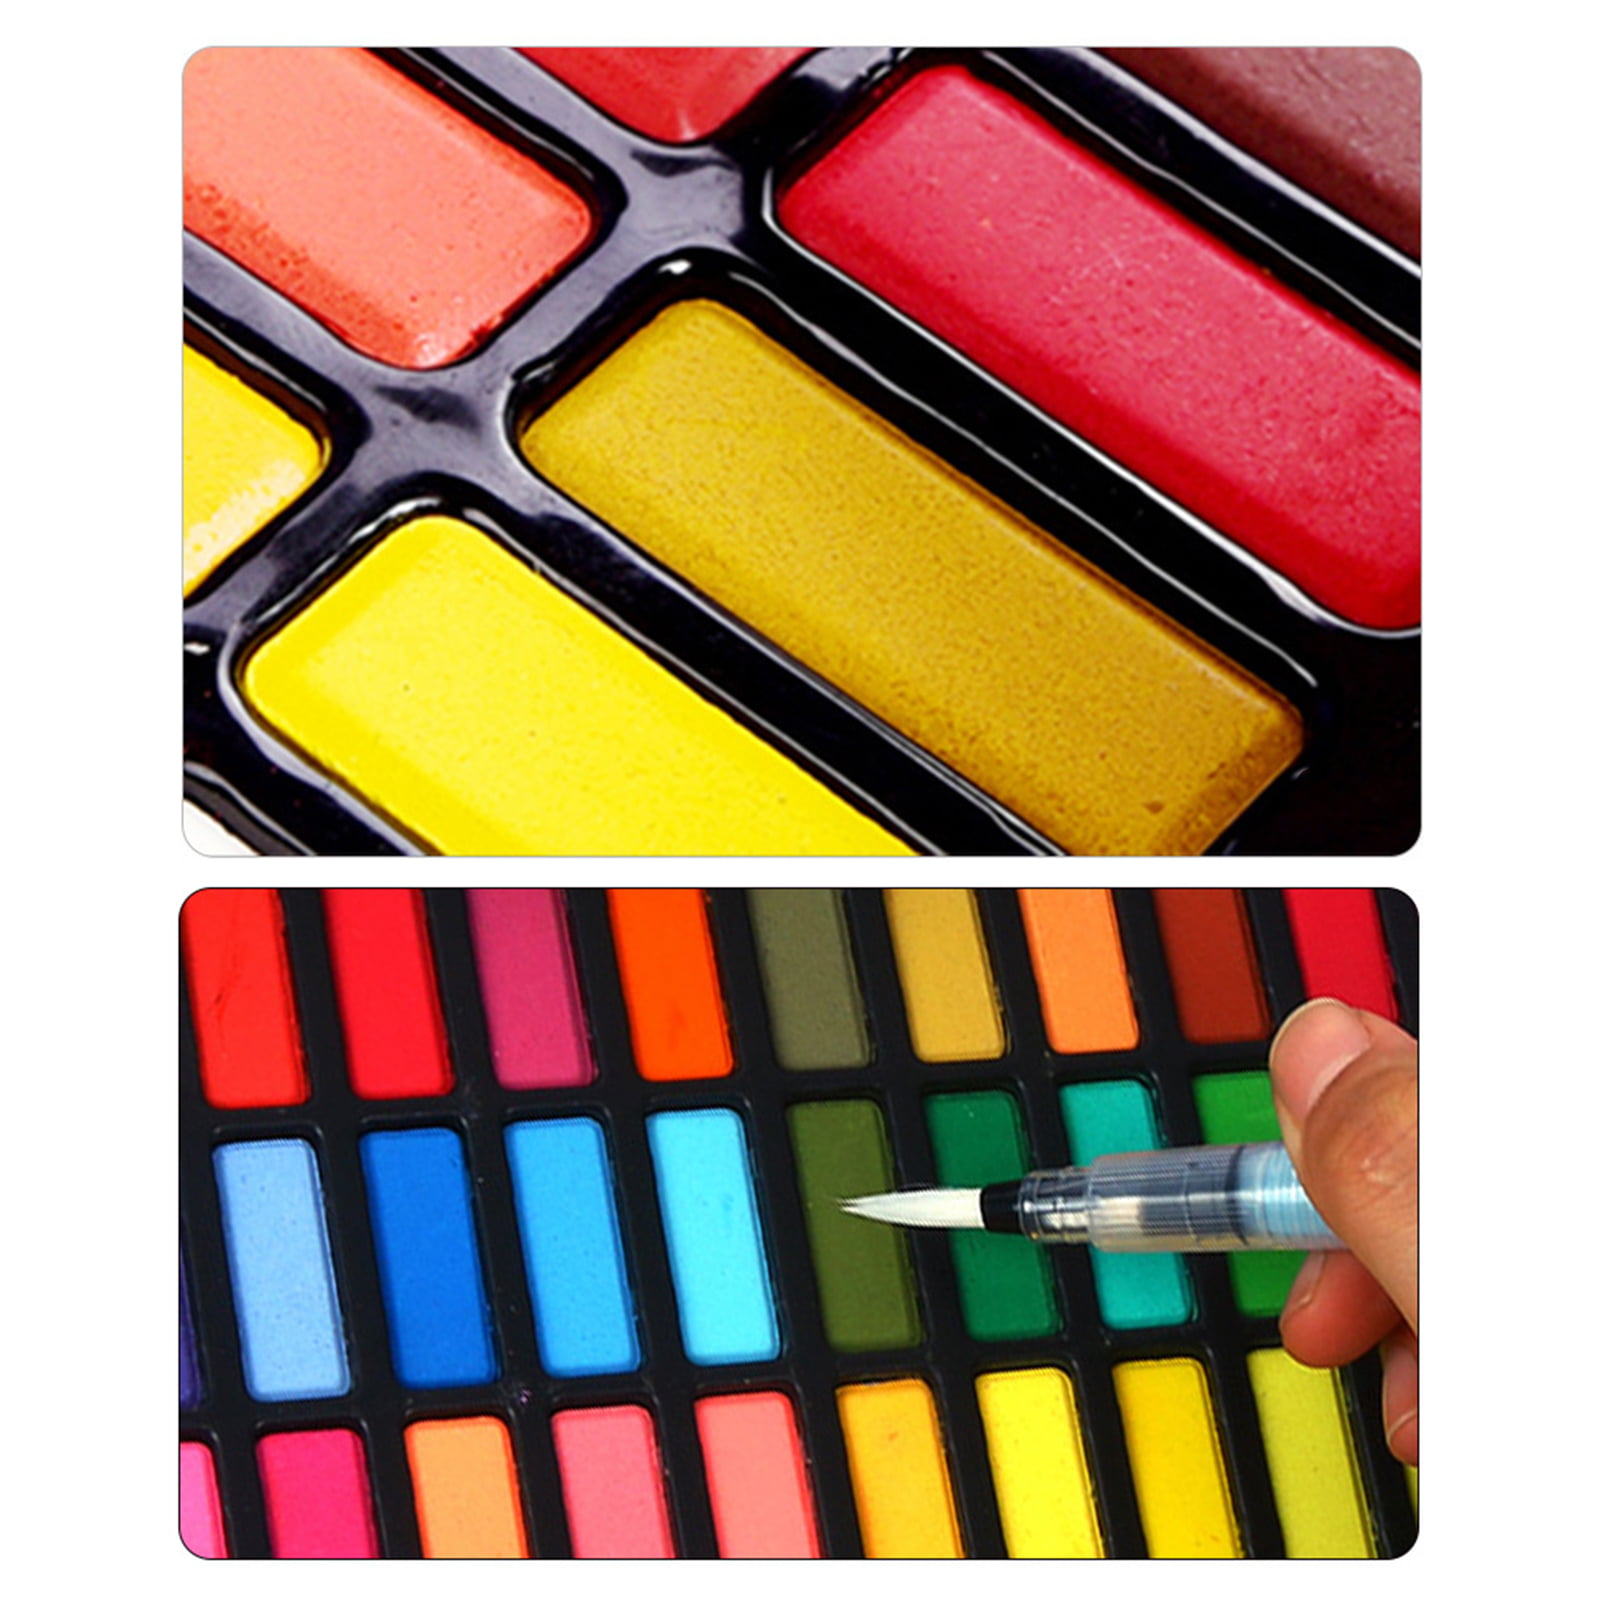 H&B 36 Watercolors Paint Set Kit with 1 * Brush Paintbrush/ 2 * Fountain  Pen/ 1 * Pninting Book Art Supplies for Artists 